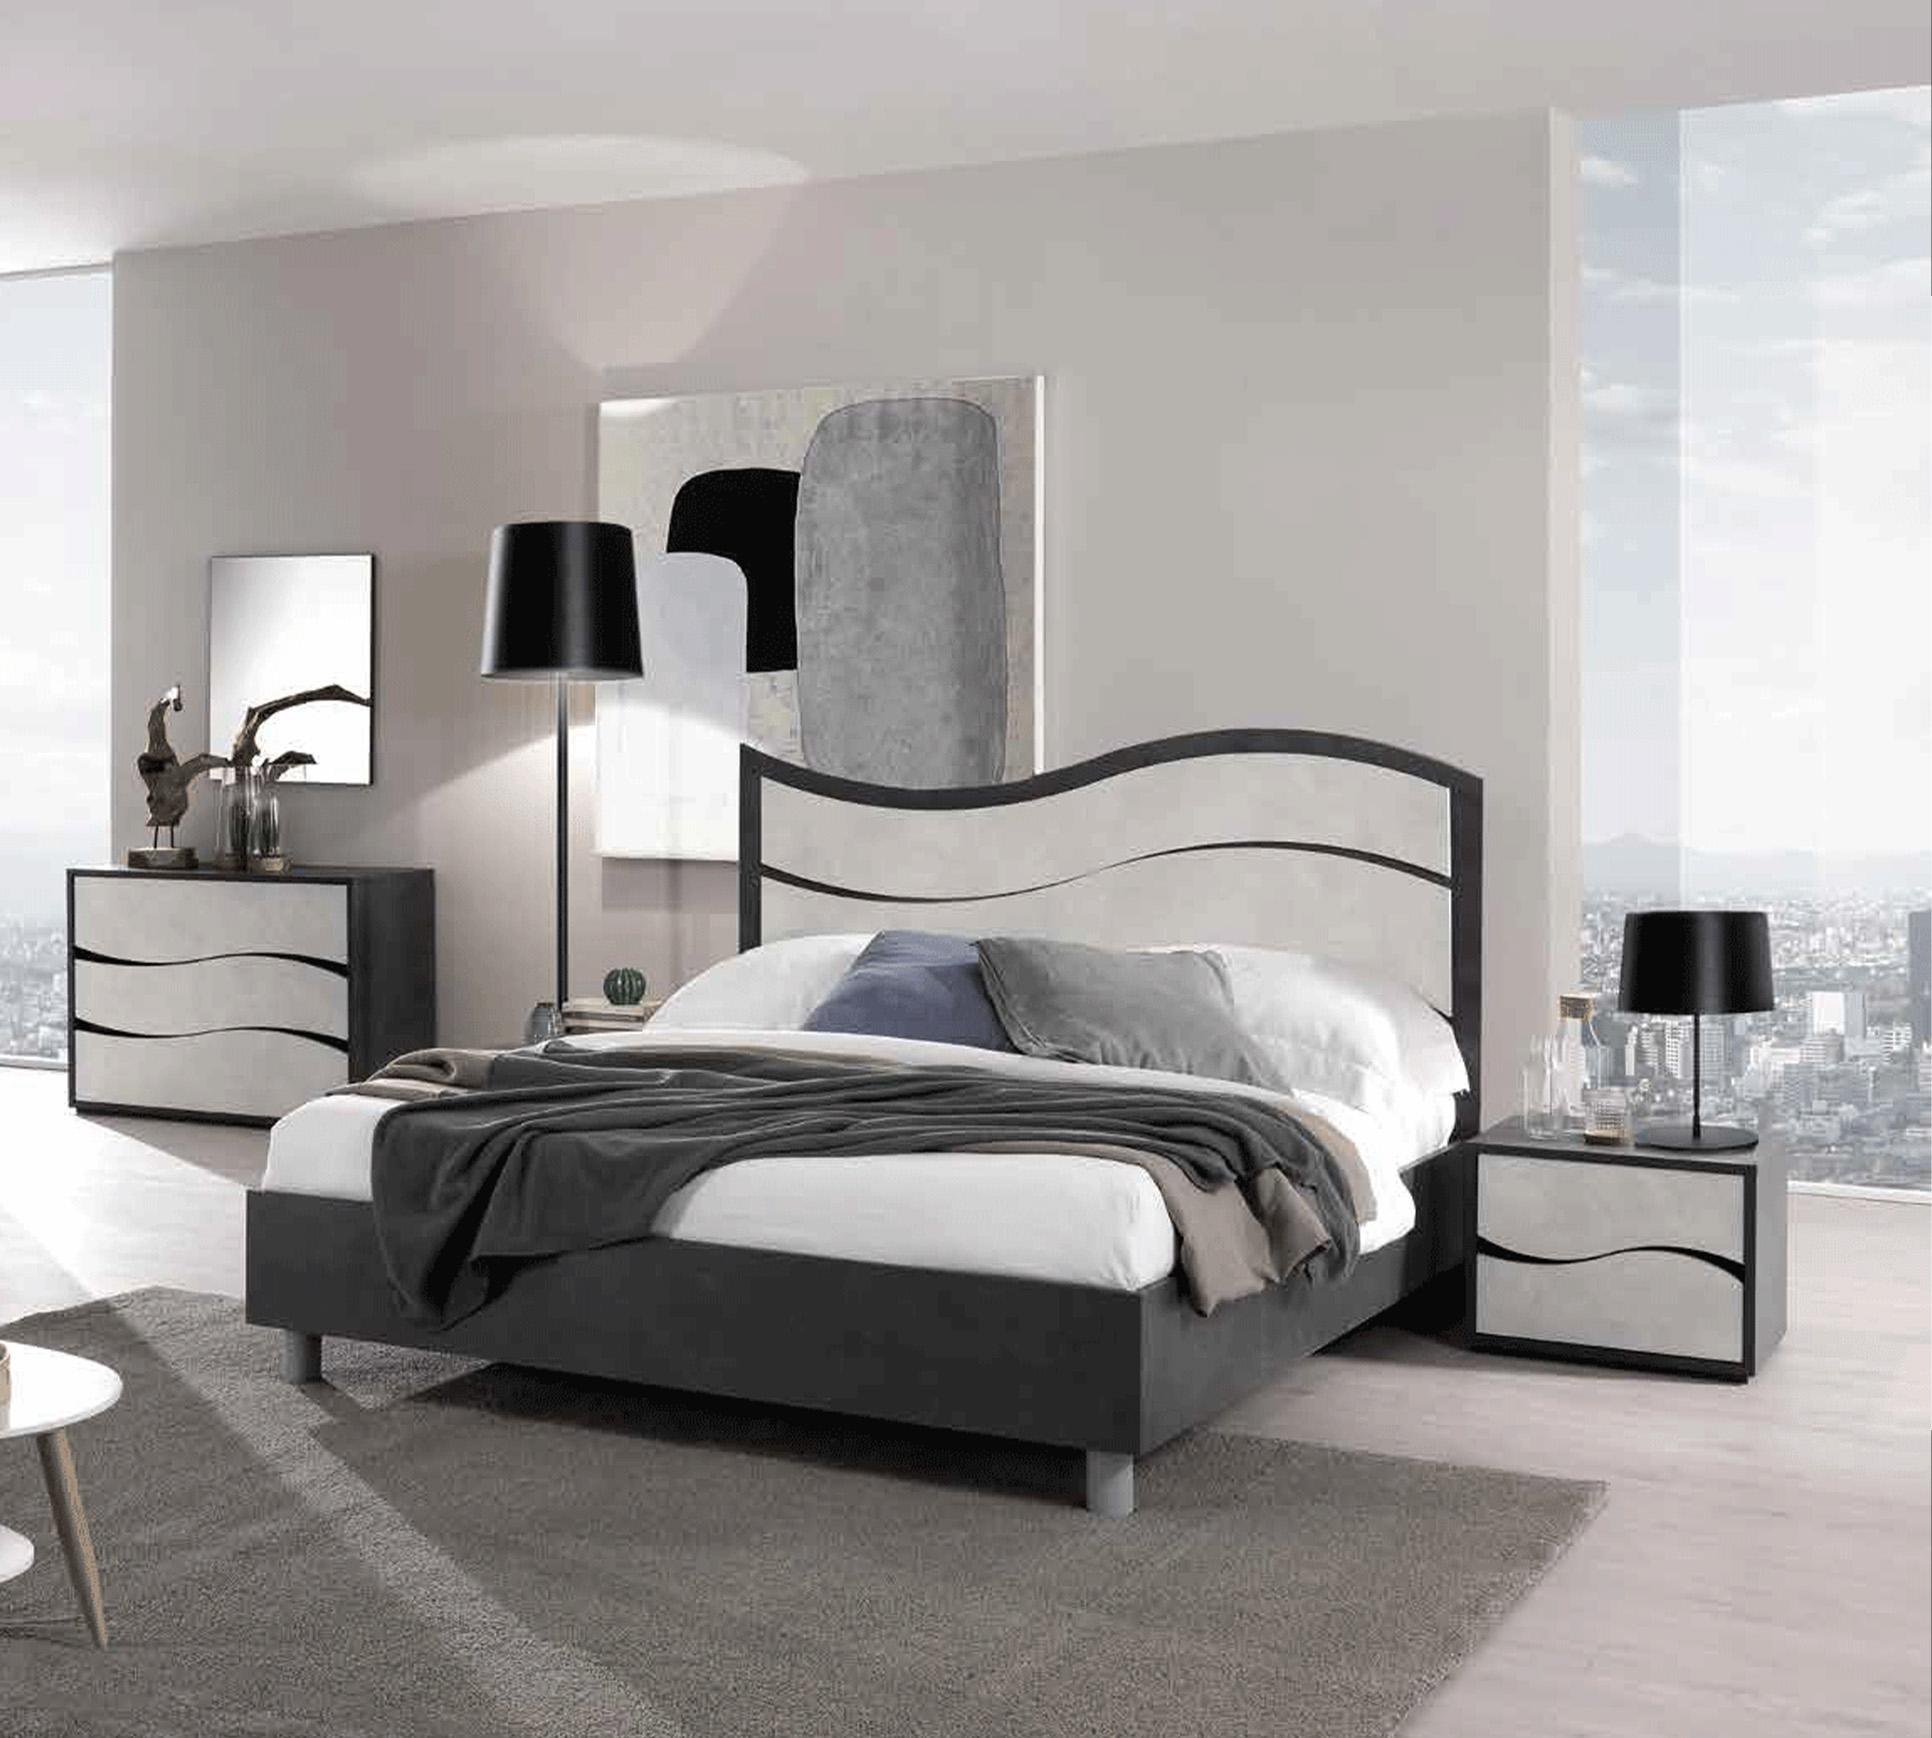 

    
Slate Grey & White King Bed ISCHIA ESF Contemporary Modern Made in ITALY
